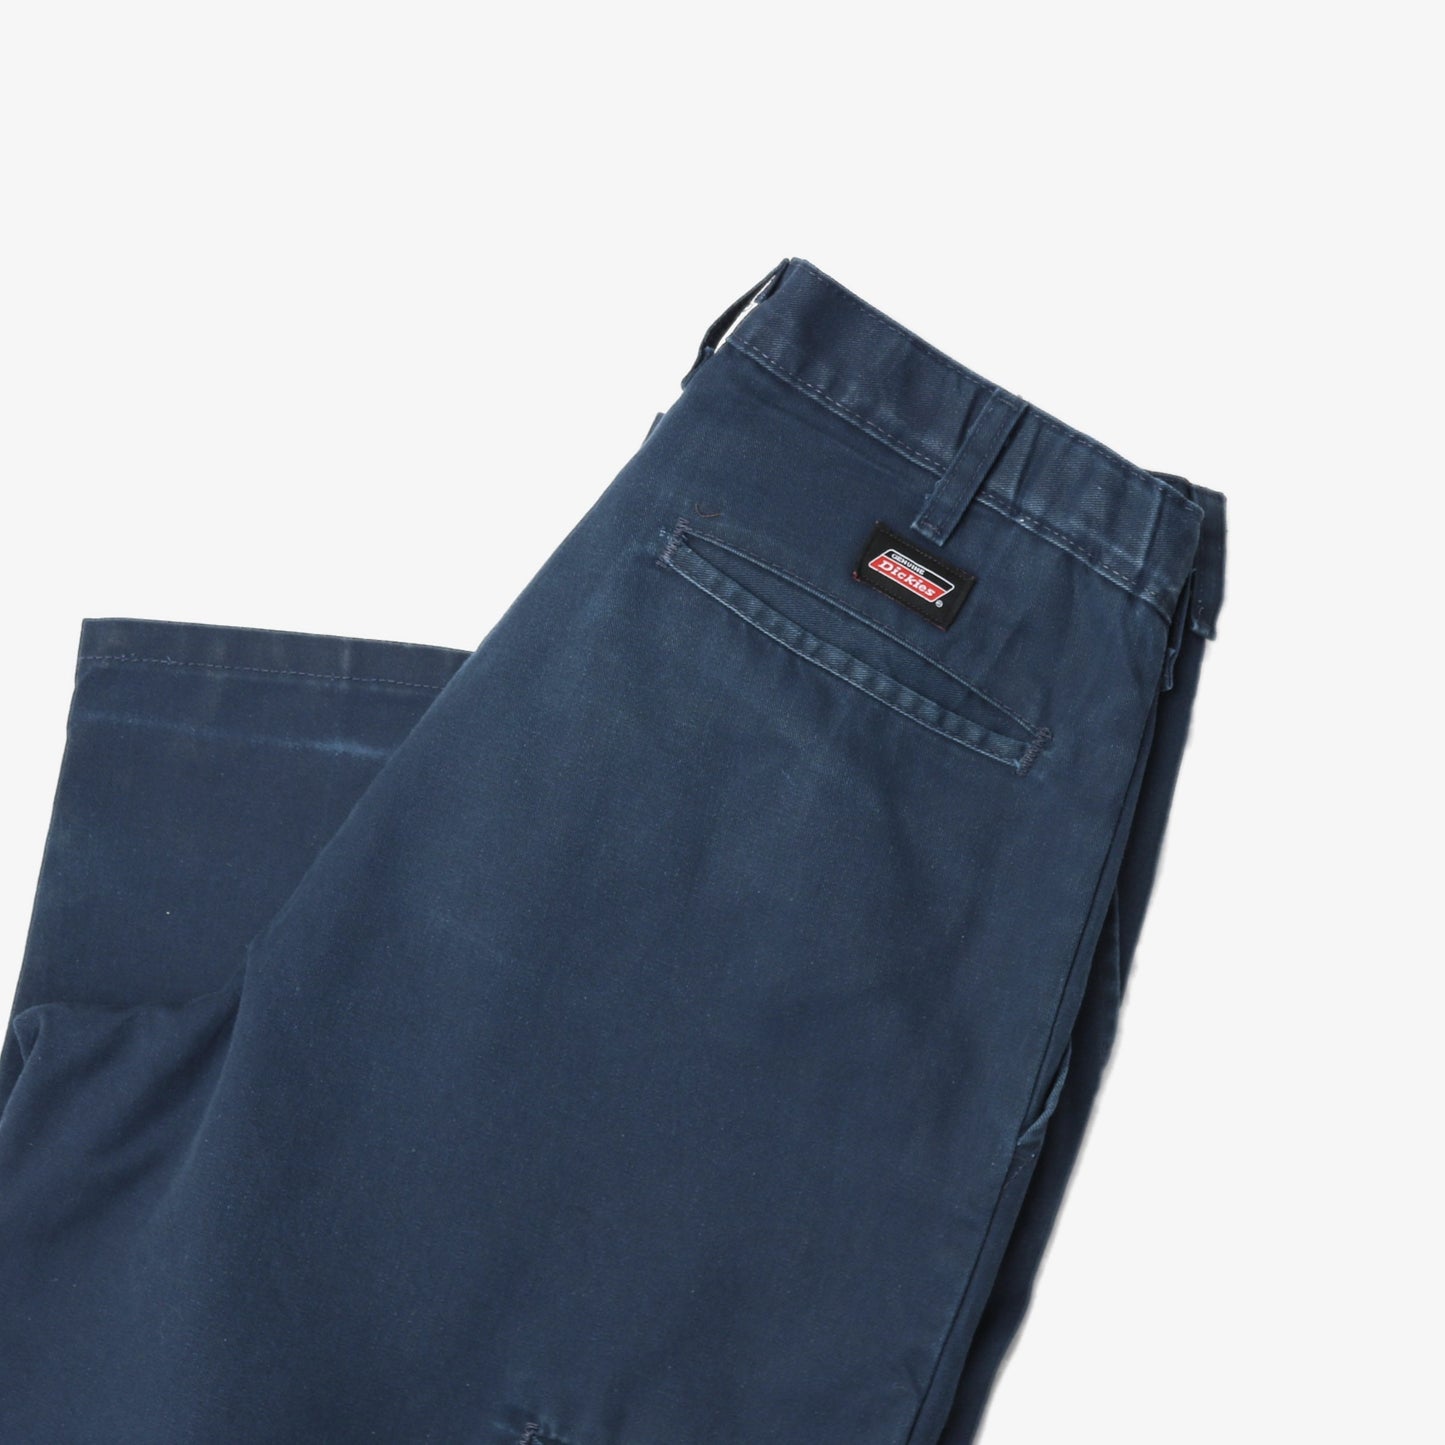 874 Work Trousers - Navy - 32/32 - American Madness